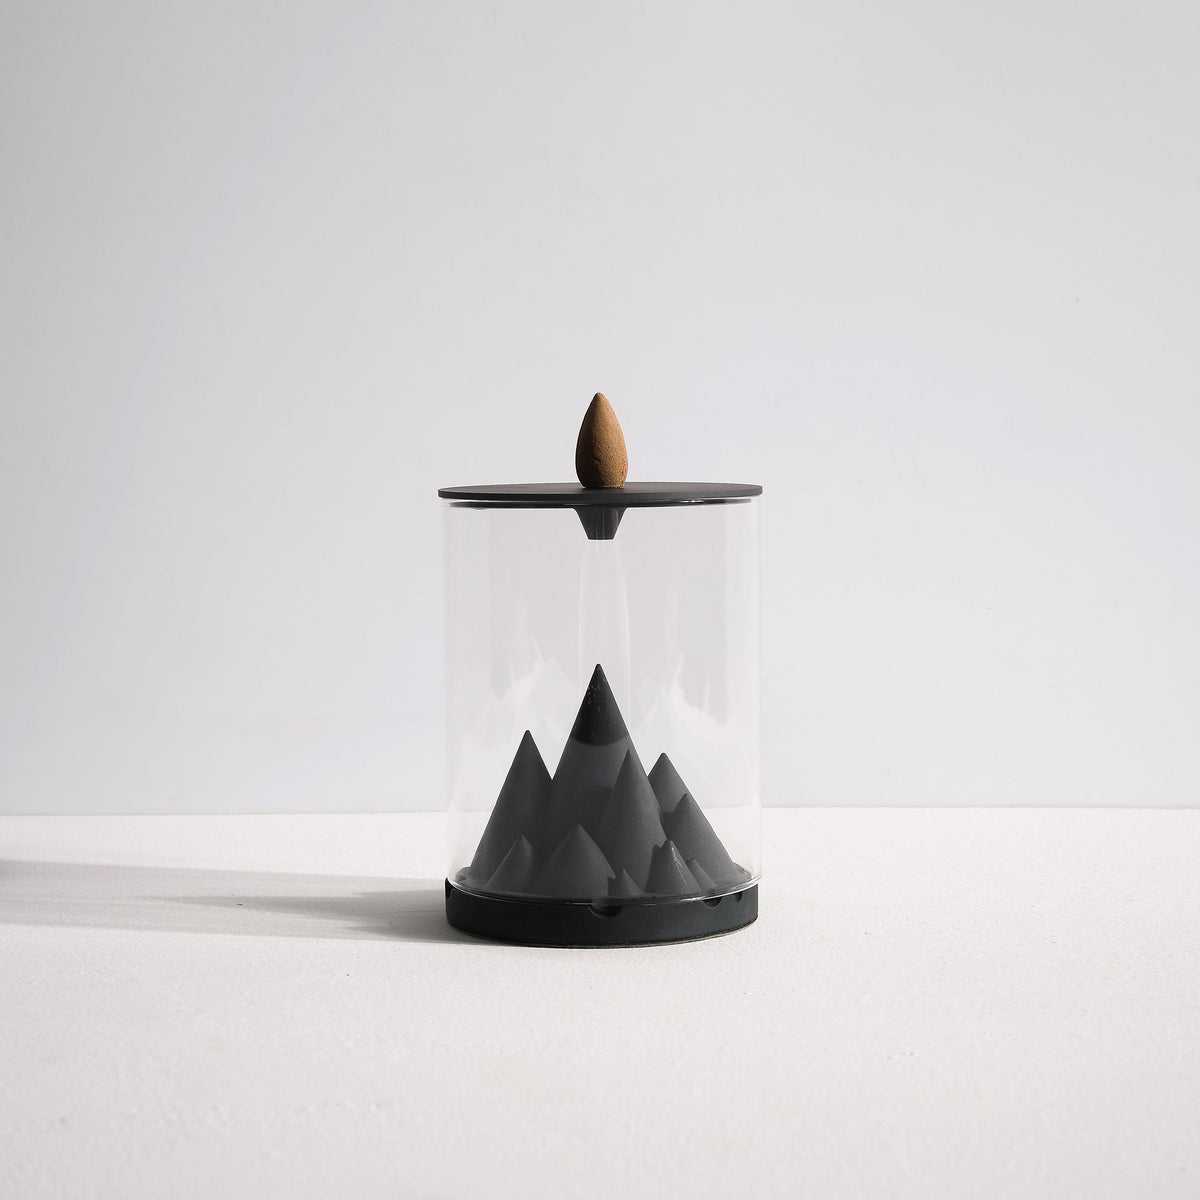 Karst Waterfall Burner by Kin Objects with Incense Cone on Top